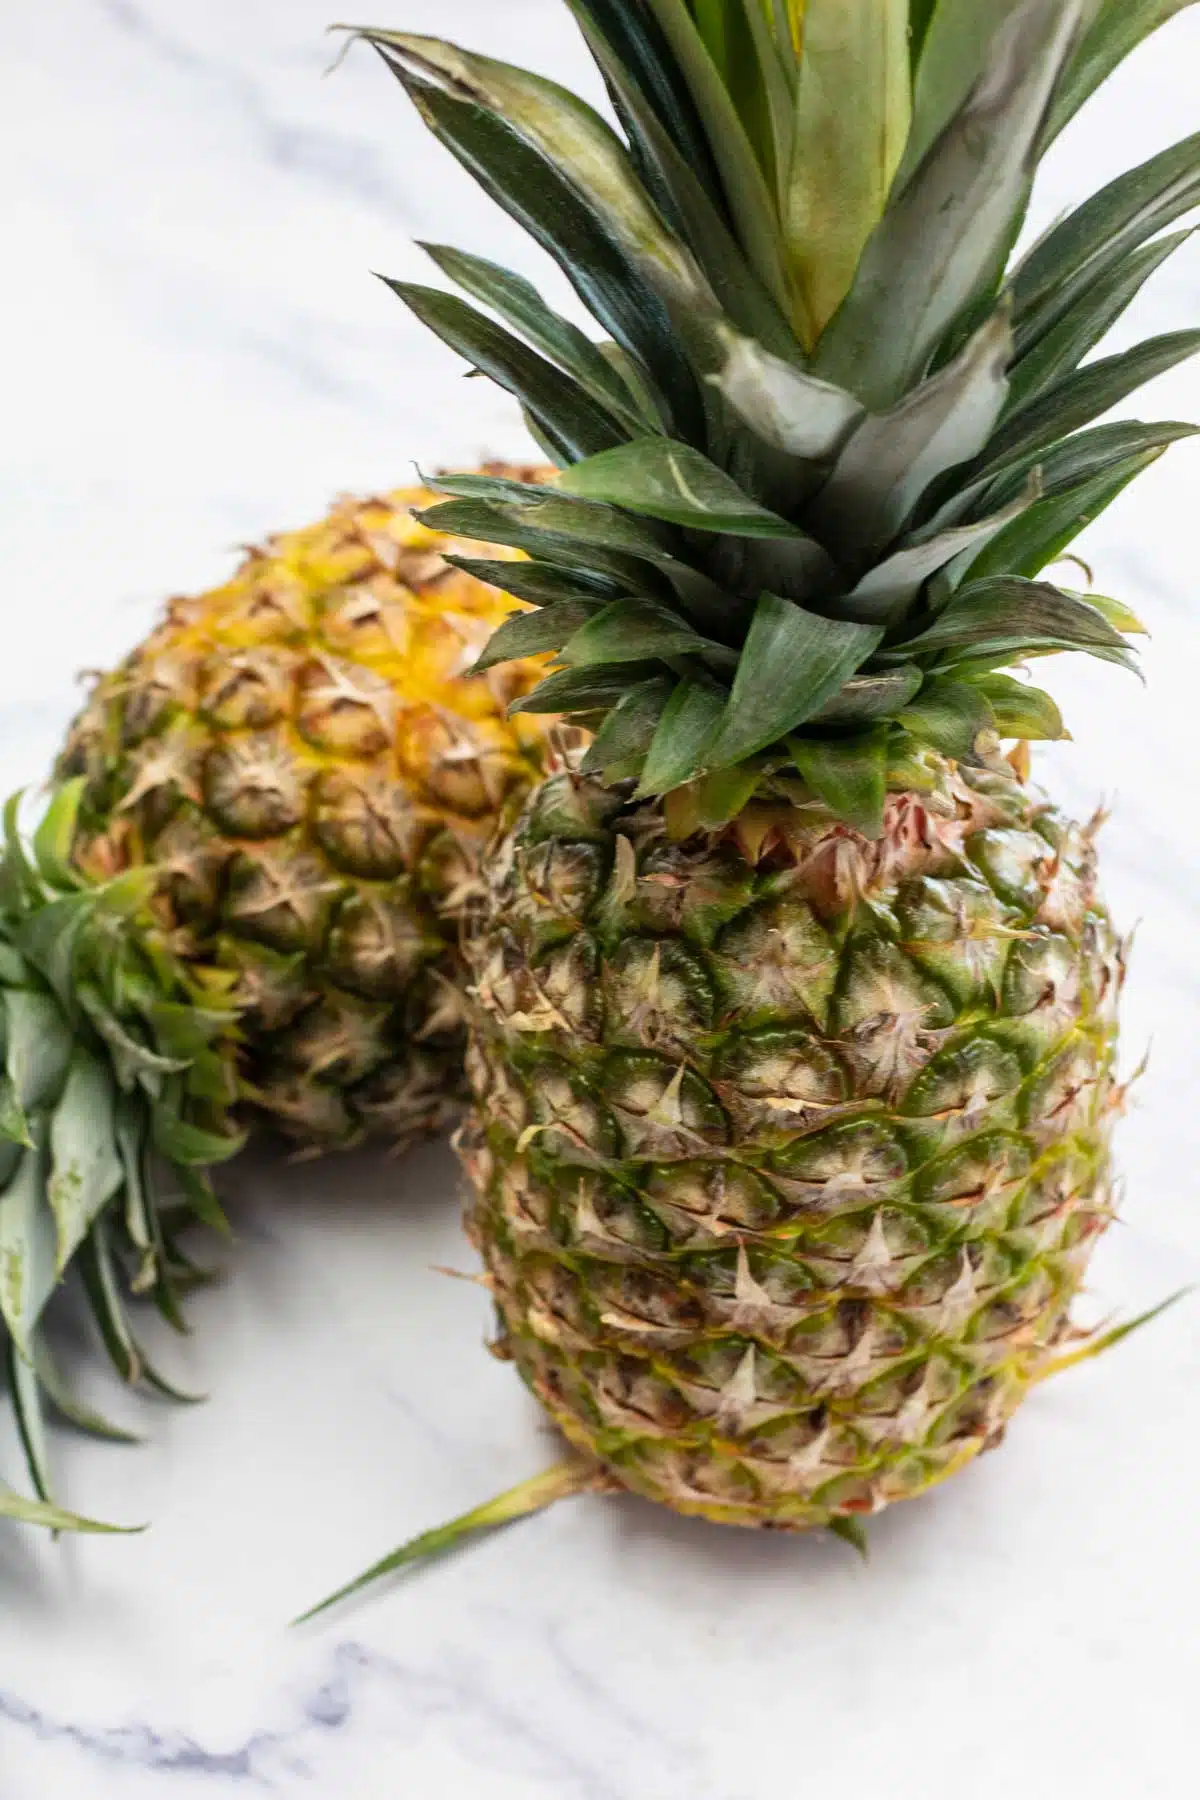 Tall image showing ingredients of pineapples.